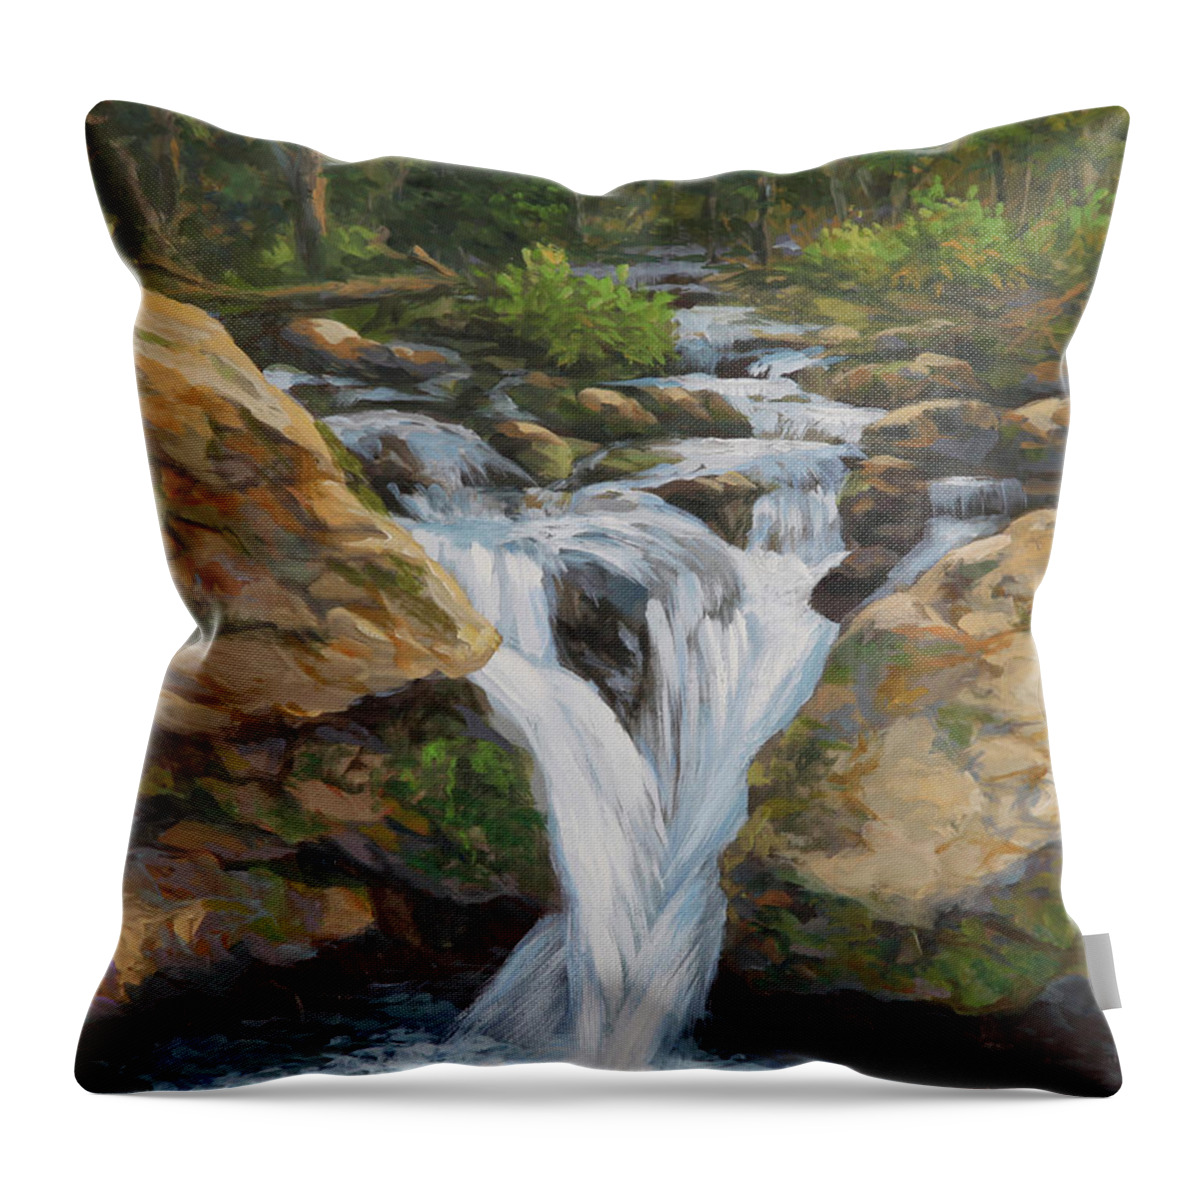 Cascades Stream Throw Pillow featuring the painting Cascades Stream by Guy Crittenden